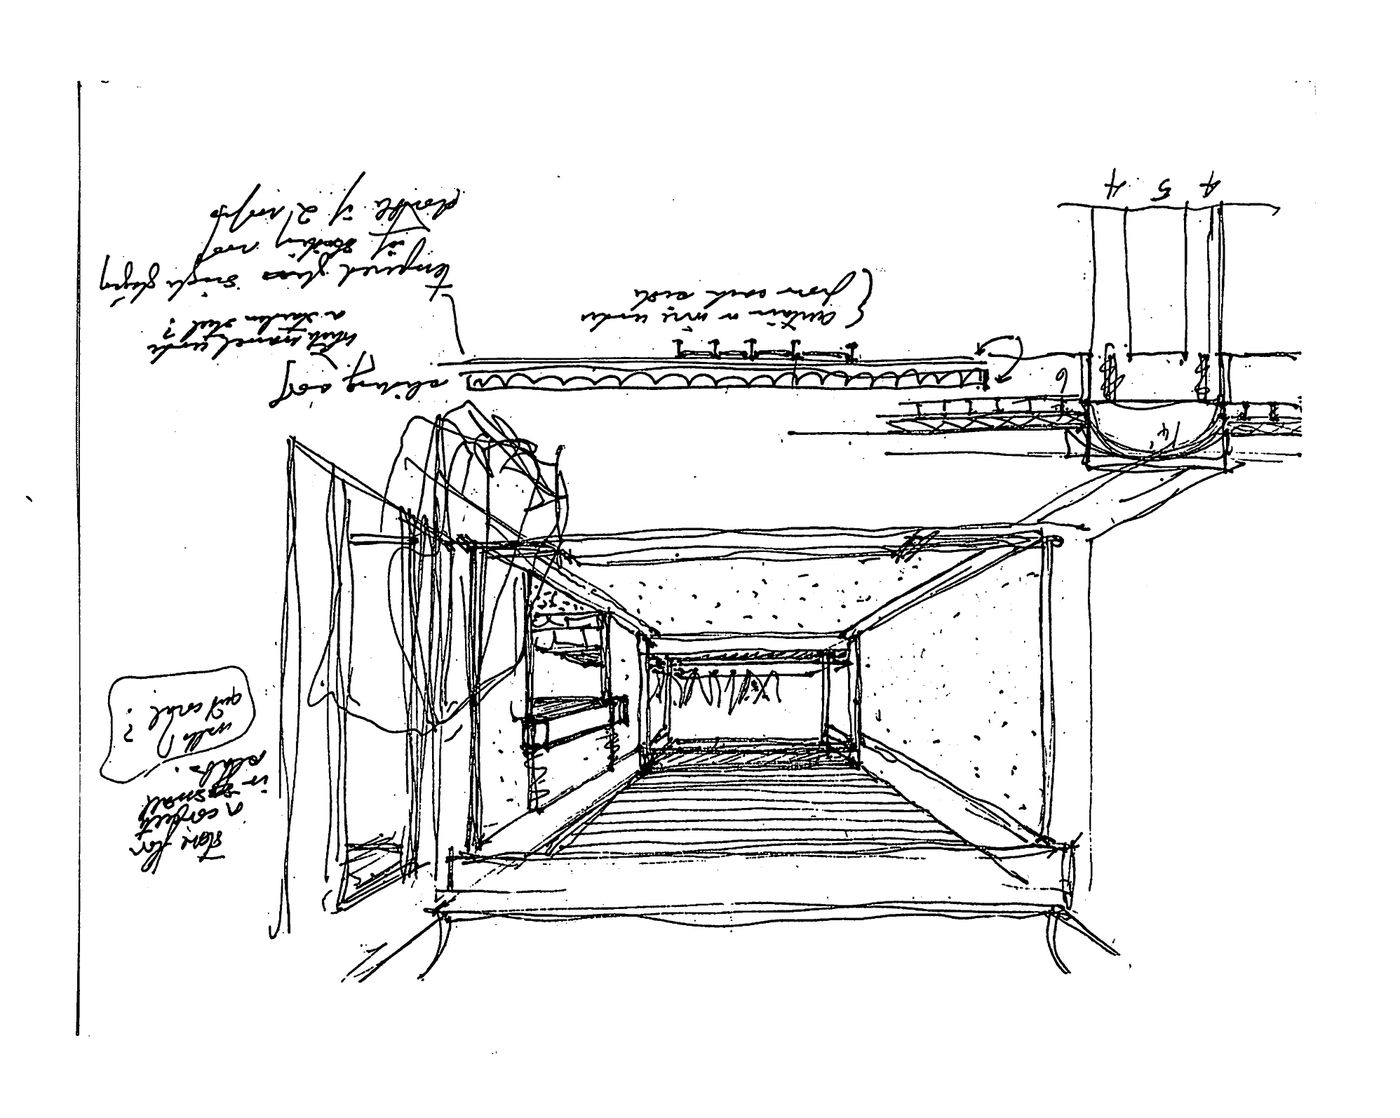 Sketches, interior perspective with elevation and section details, Private Residence, Pacific North-West (also called "Bagley Wright House")